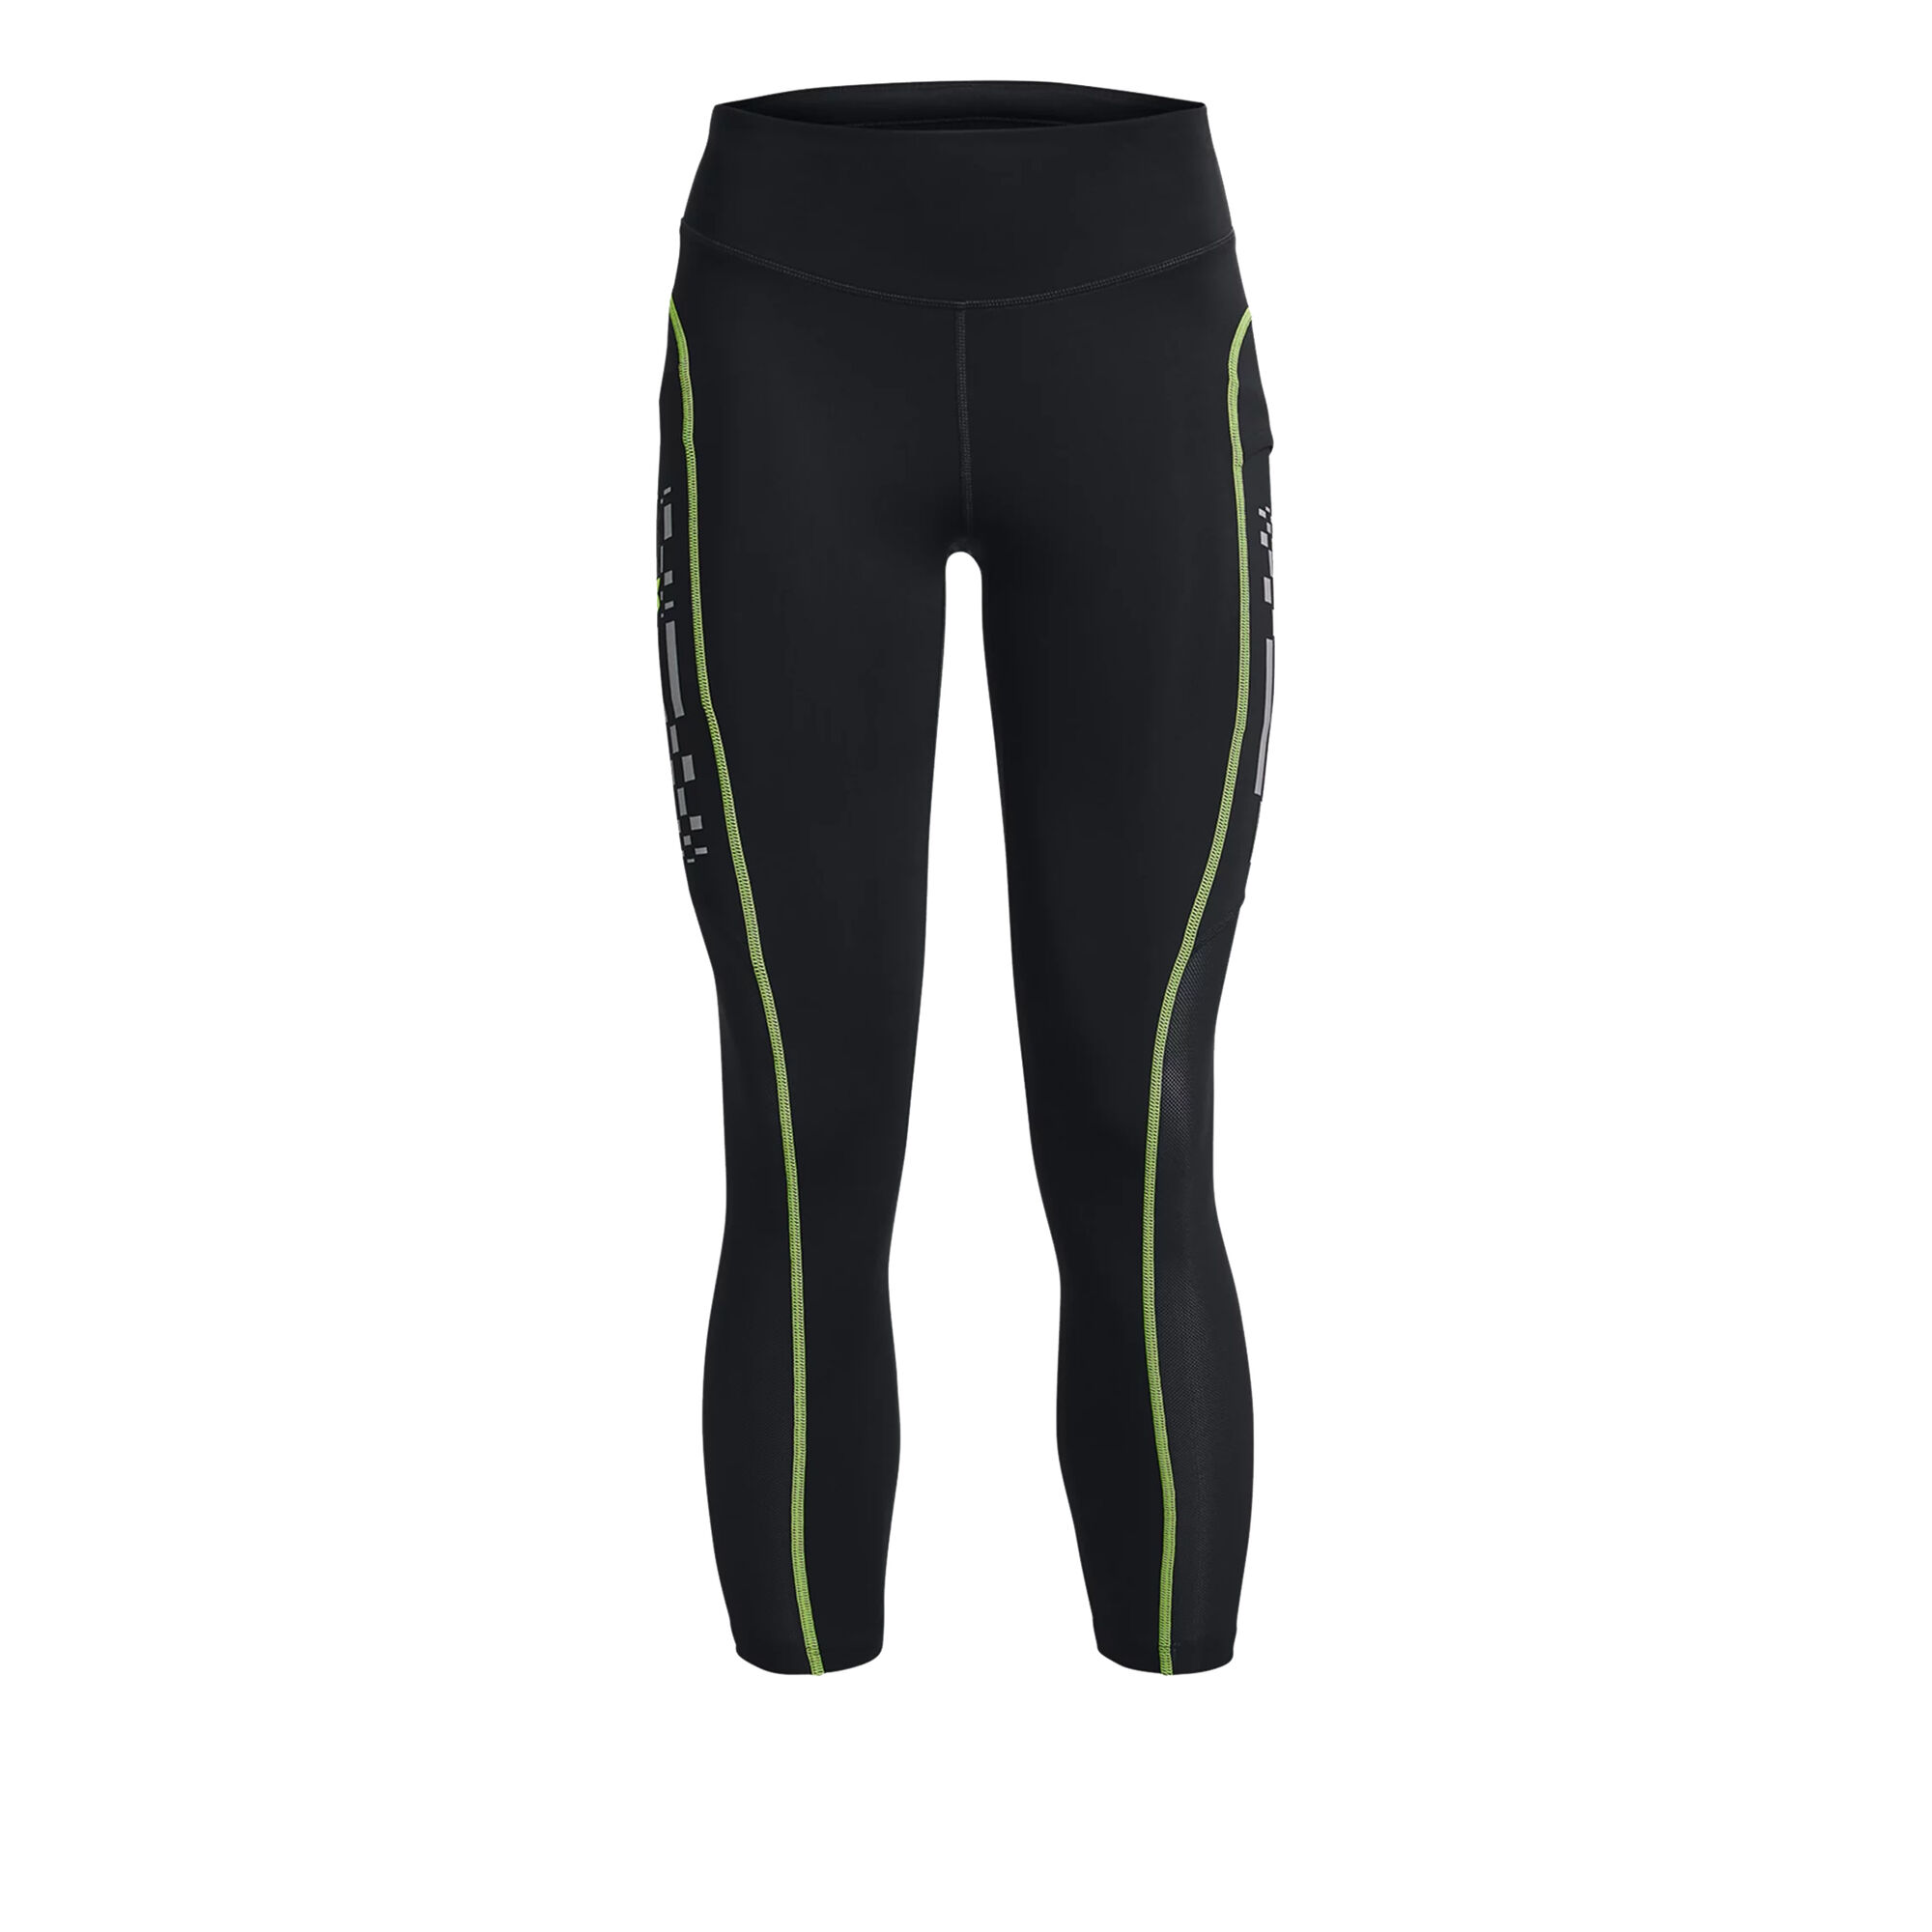 Buy Under Armour Run Anywhere Ankle Tight Women Black, Green online